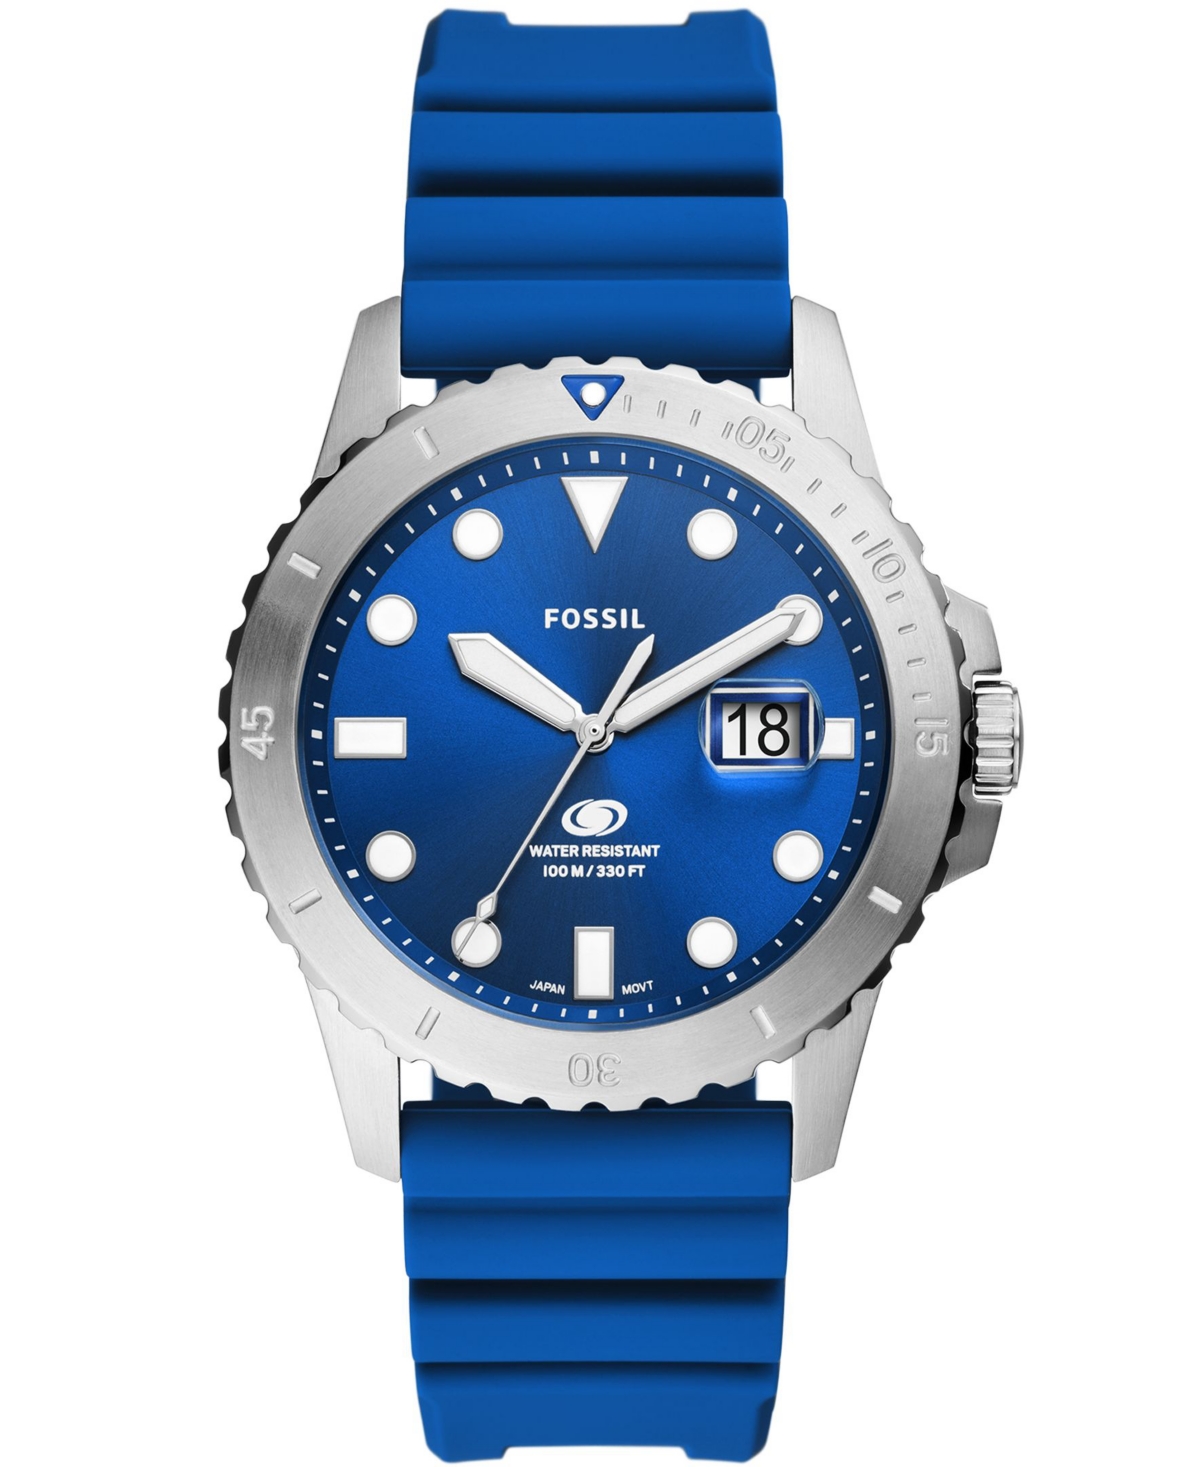 Fossil Men's Three-Hand Date Blue Silicone Strap Watch 42mm